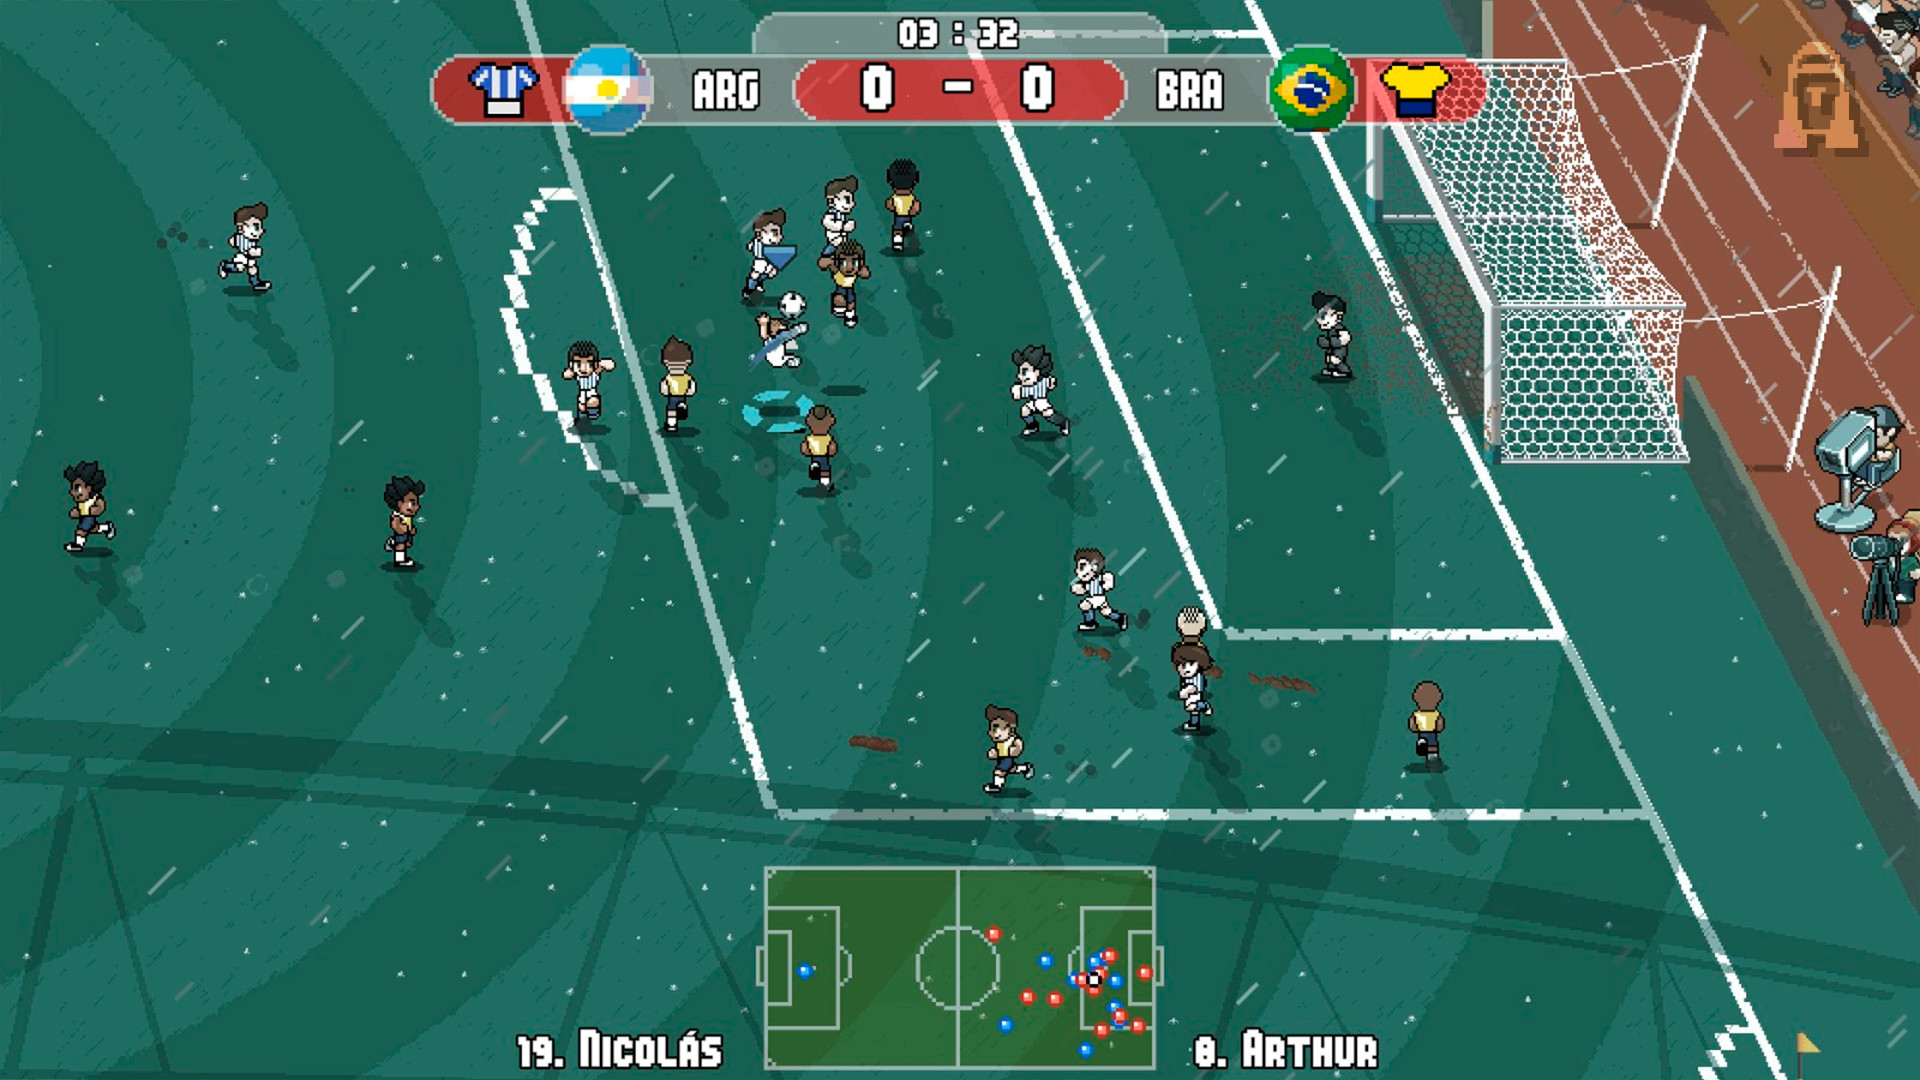 Pixel Cup Soccer - Ultimate Edition Free Download